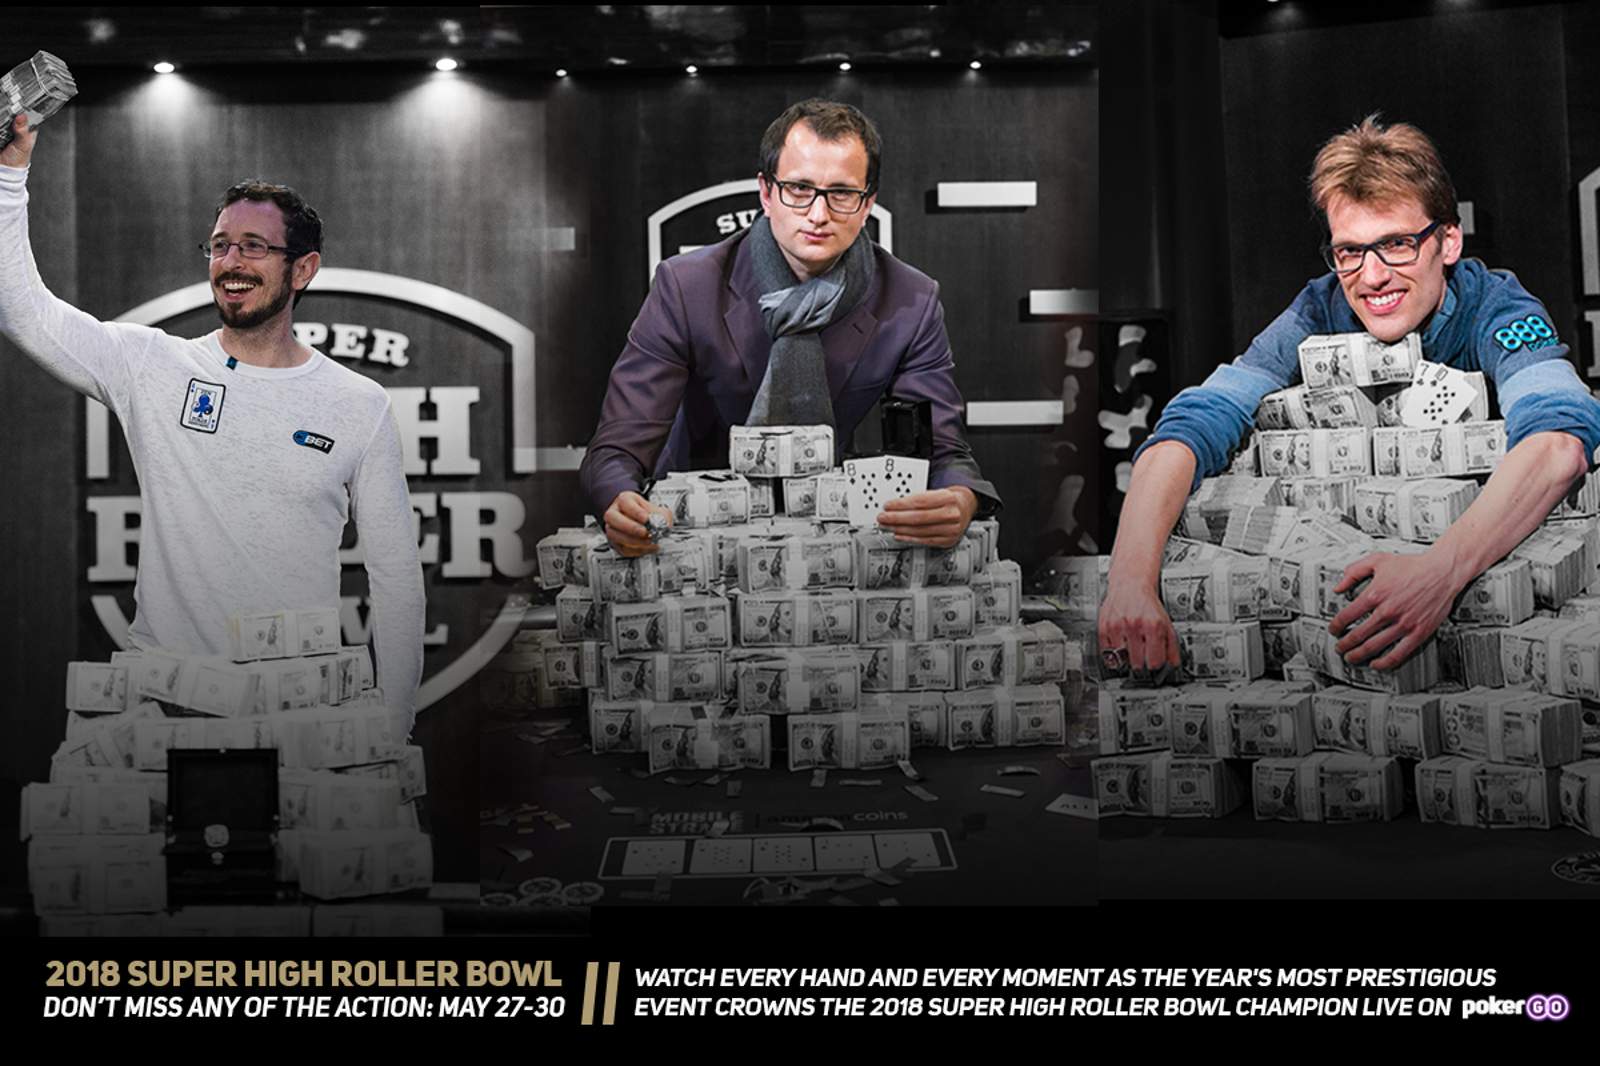 2018 Super High Roller Bowl Announced, Registration Opens March 1